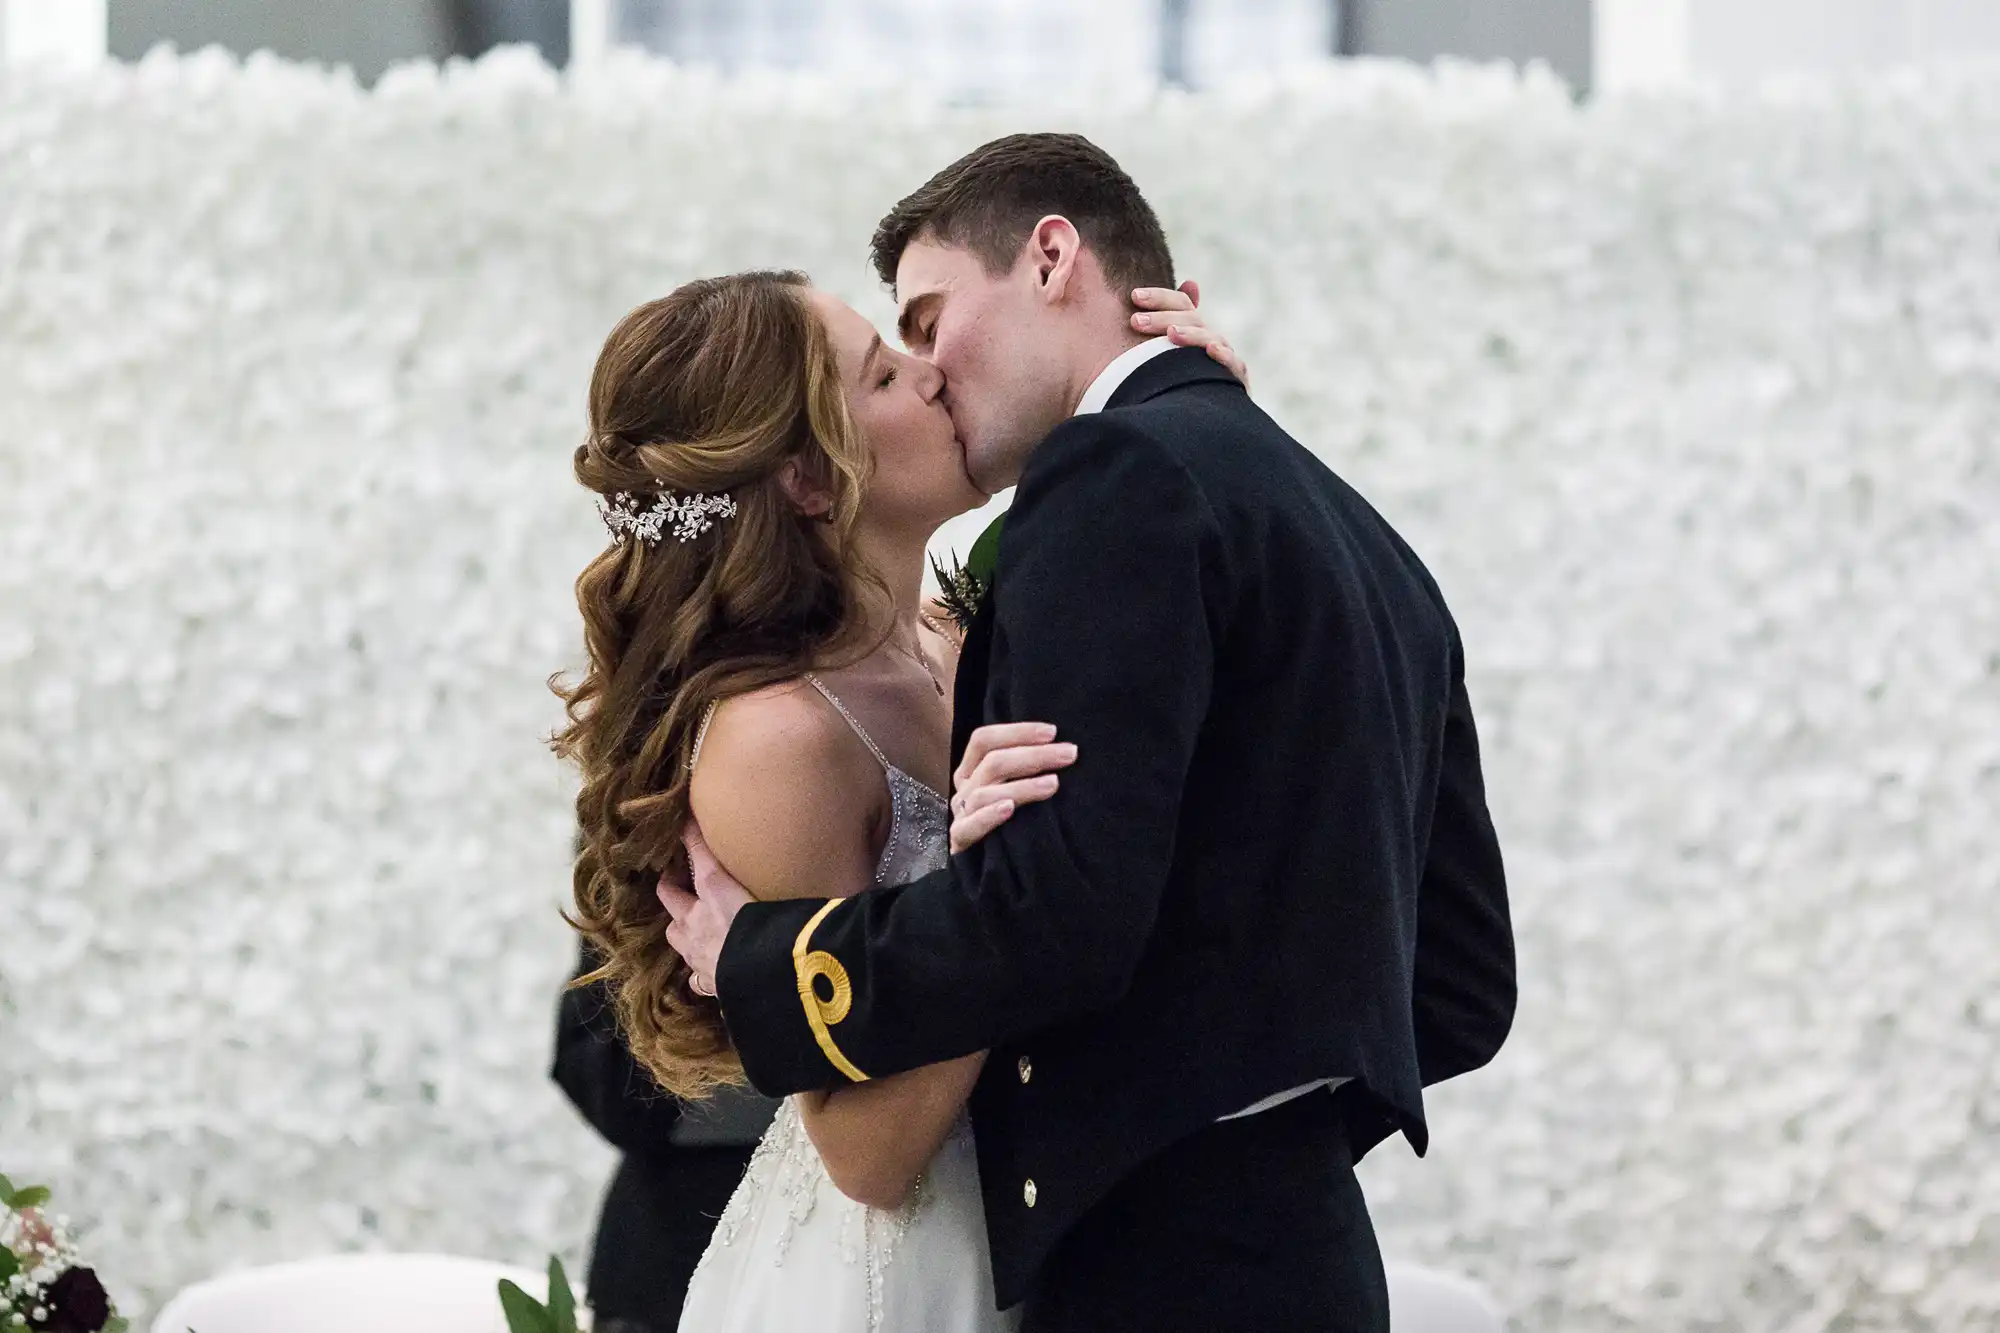 A bride and groom kiss passionately during their wedding ceremony. The bride wears a white dress and hair accessories; the groom is in a formal dark suit with gold trim. They embrace in front of a floral backdrop.